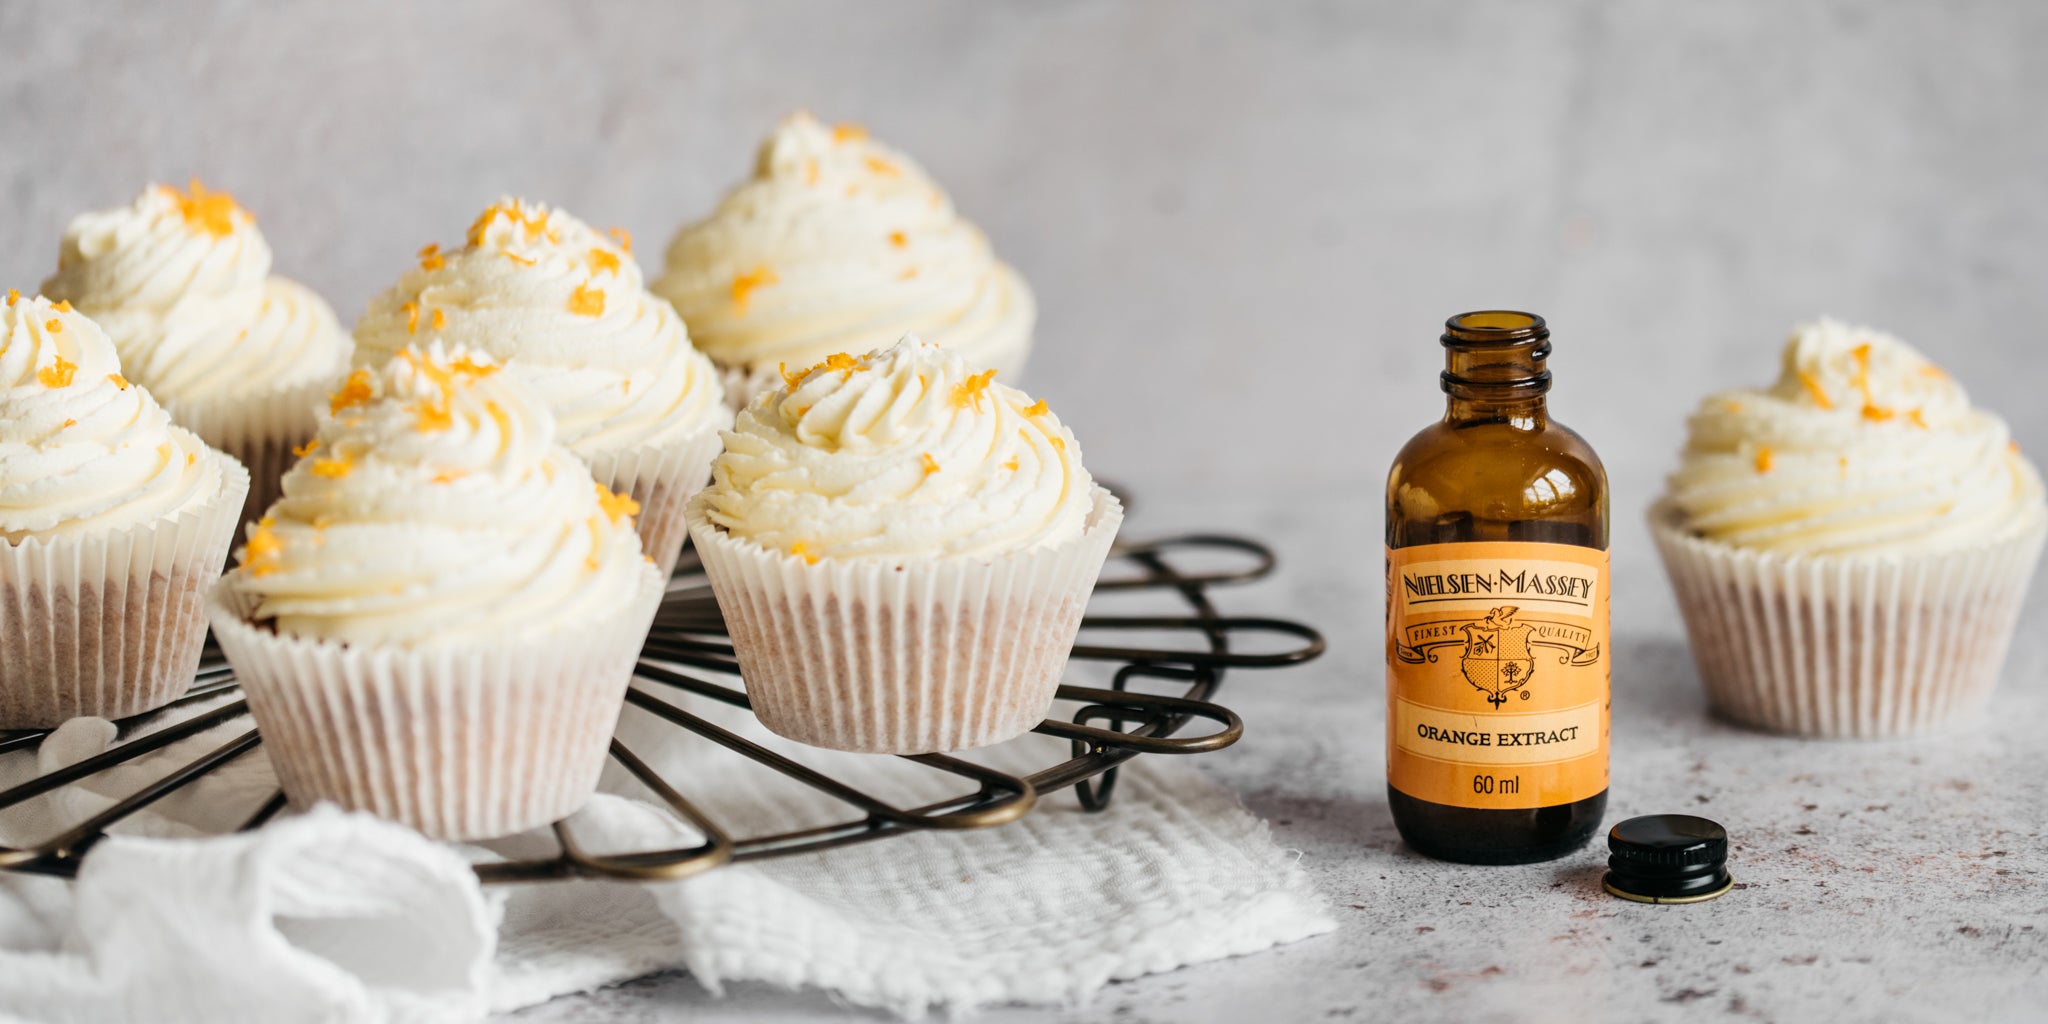 Orange Blossom Cupcakes on a wire rack next to a bottle of Nielsen Massey Orange Blossom Extract